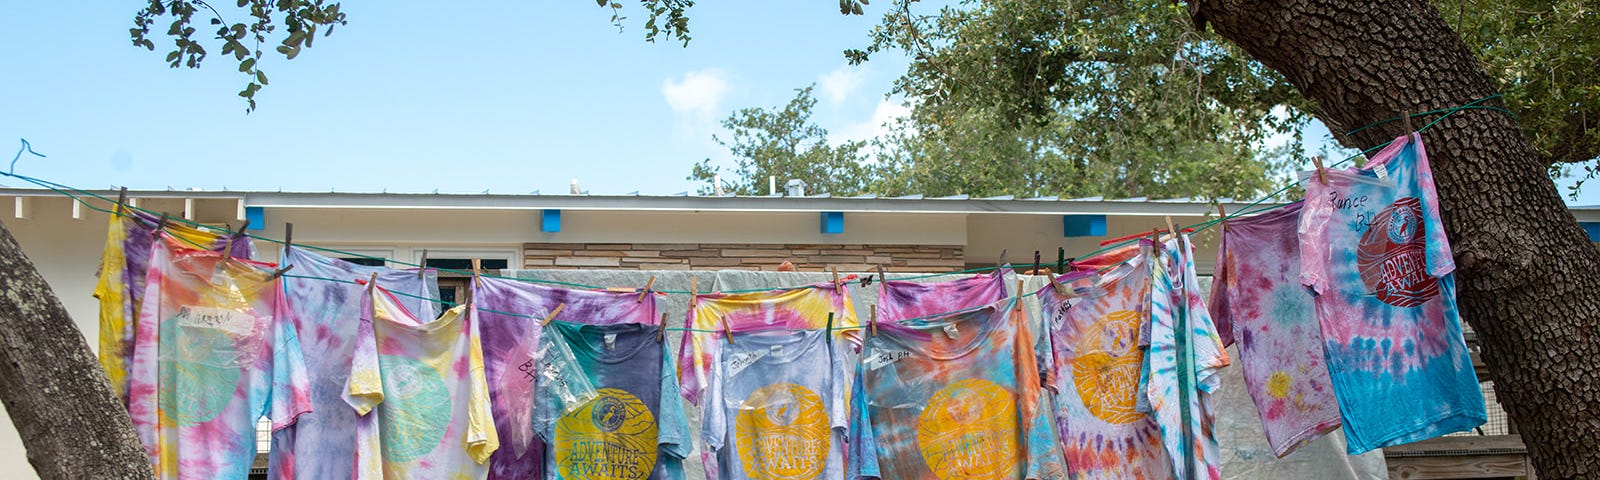 Freshly tie-dyed t-shirts hang to dry on clothes line between two trees at Camp Aranzazu